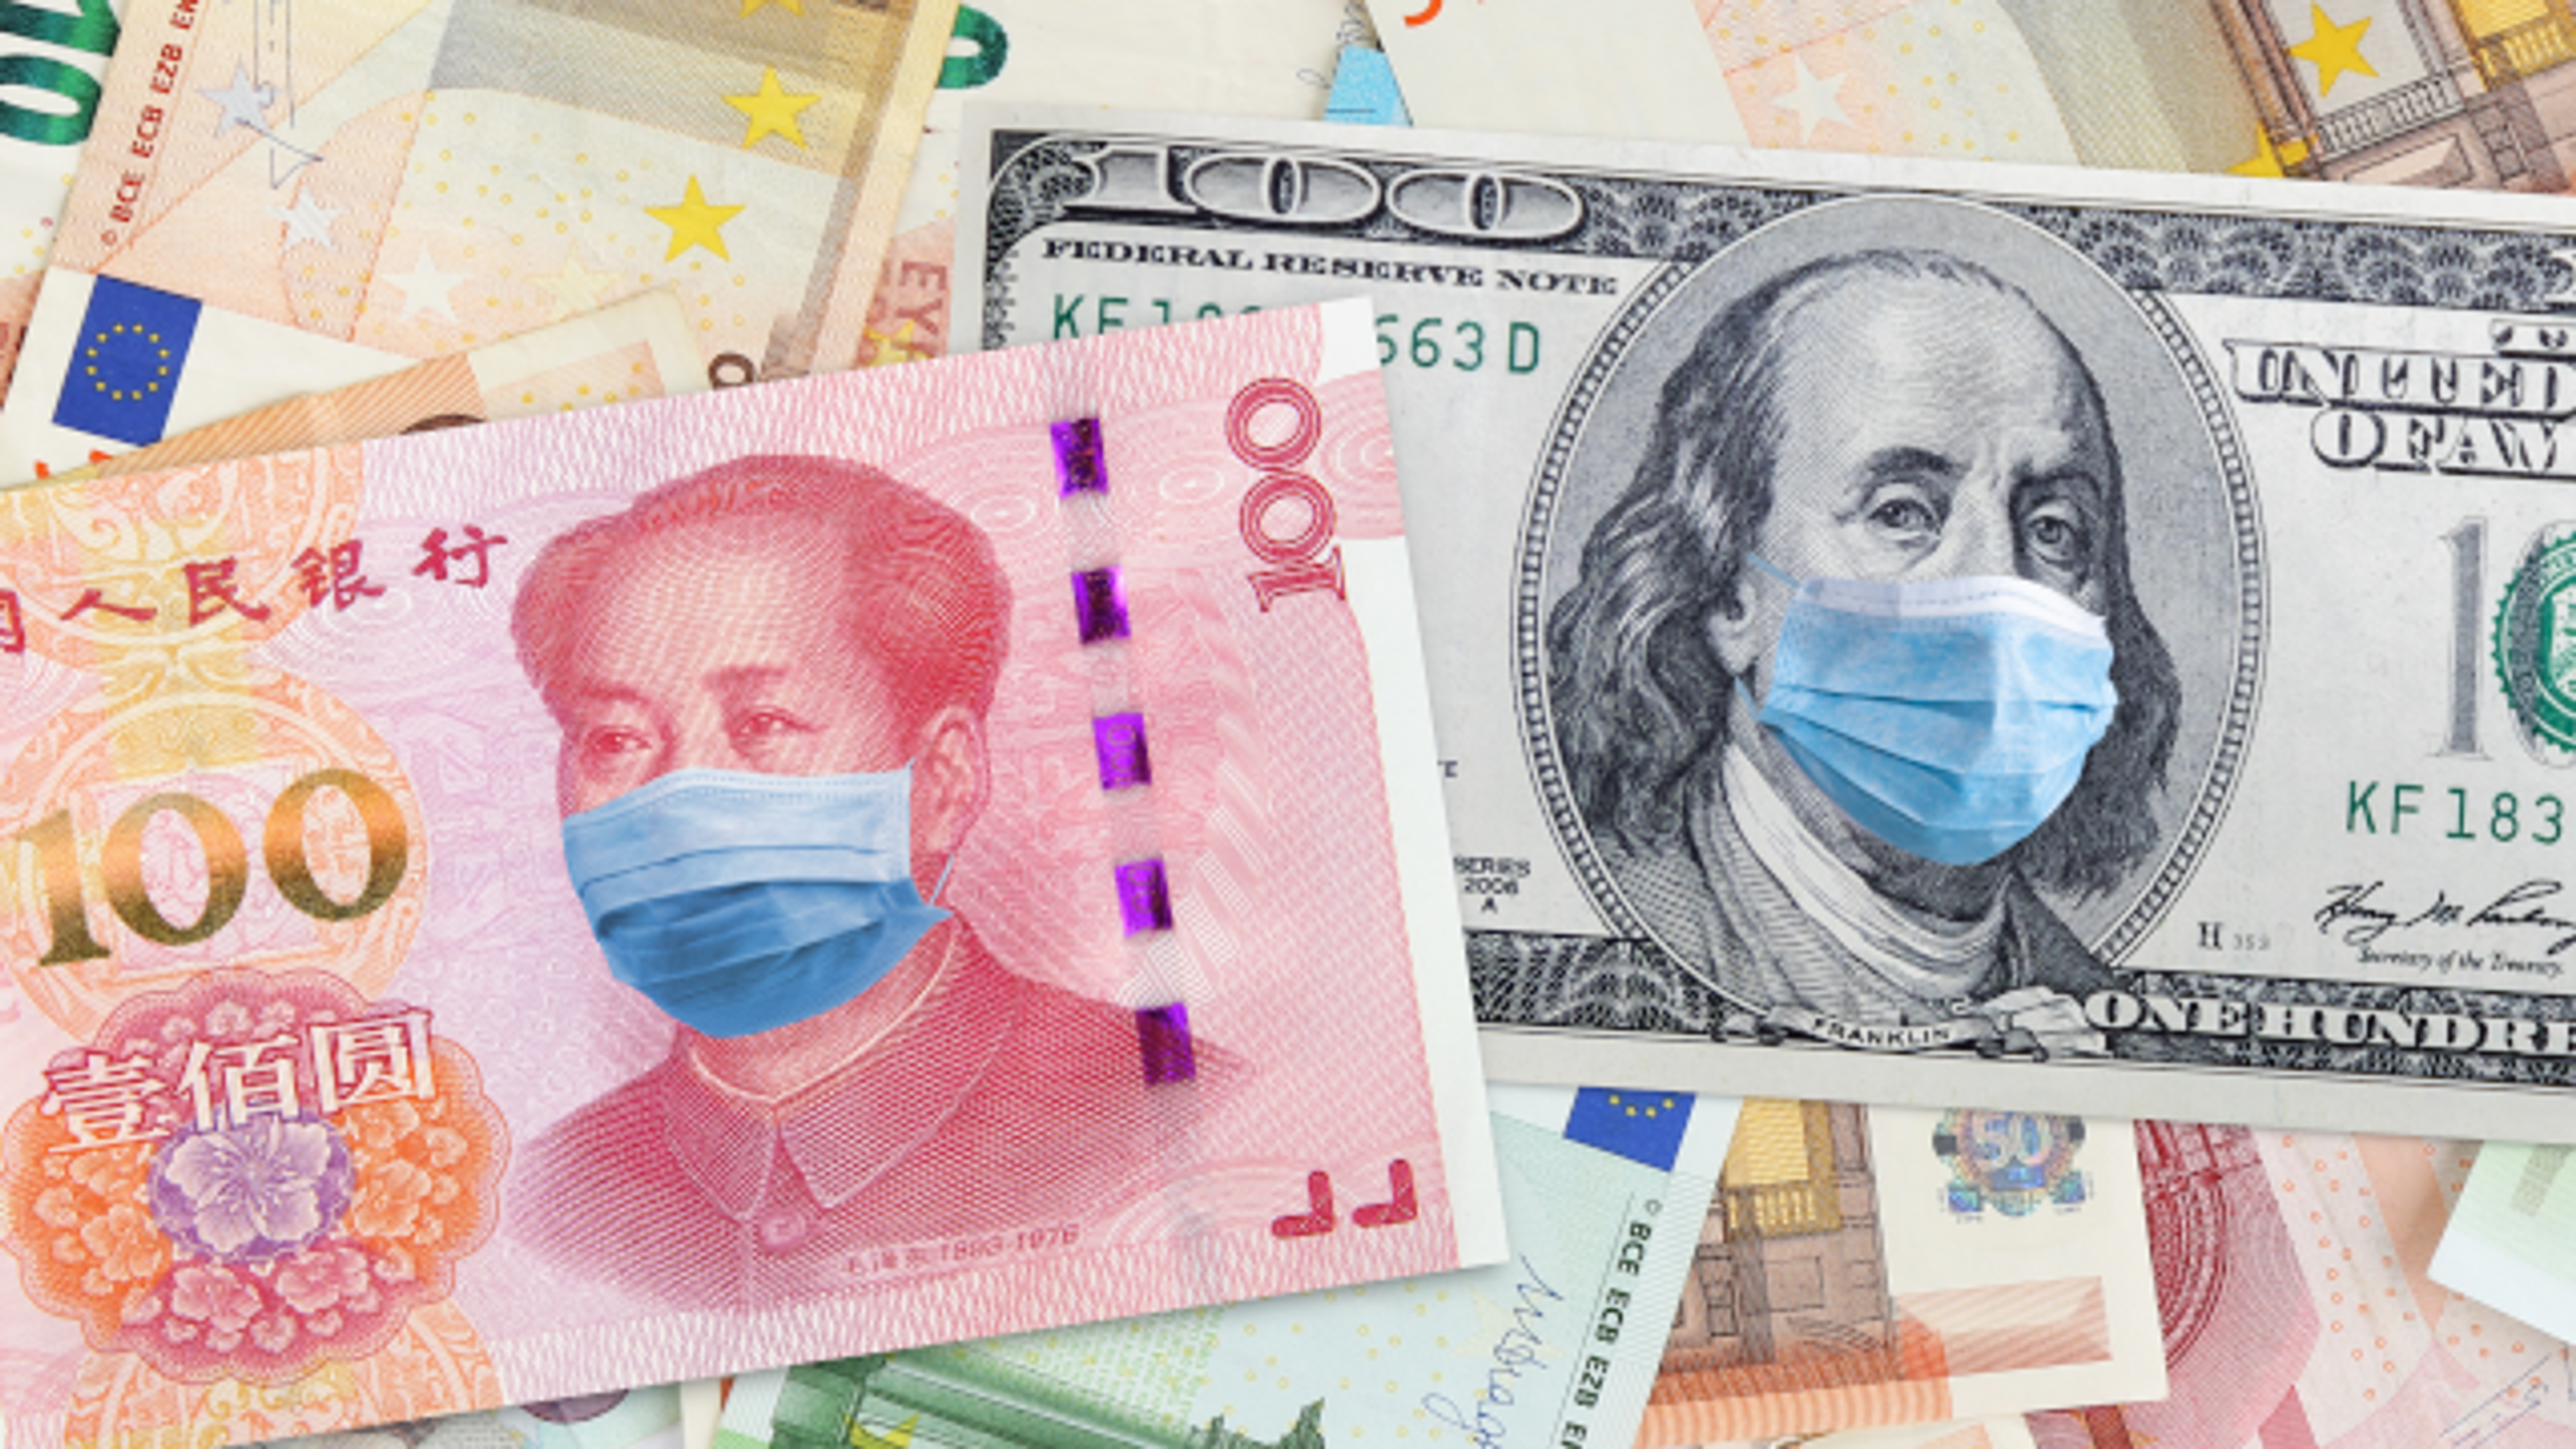 A collage of various paper currencies where the portraits on the money are wearing medical masks